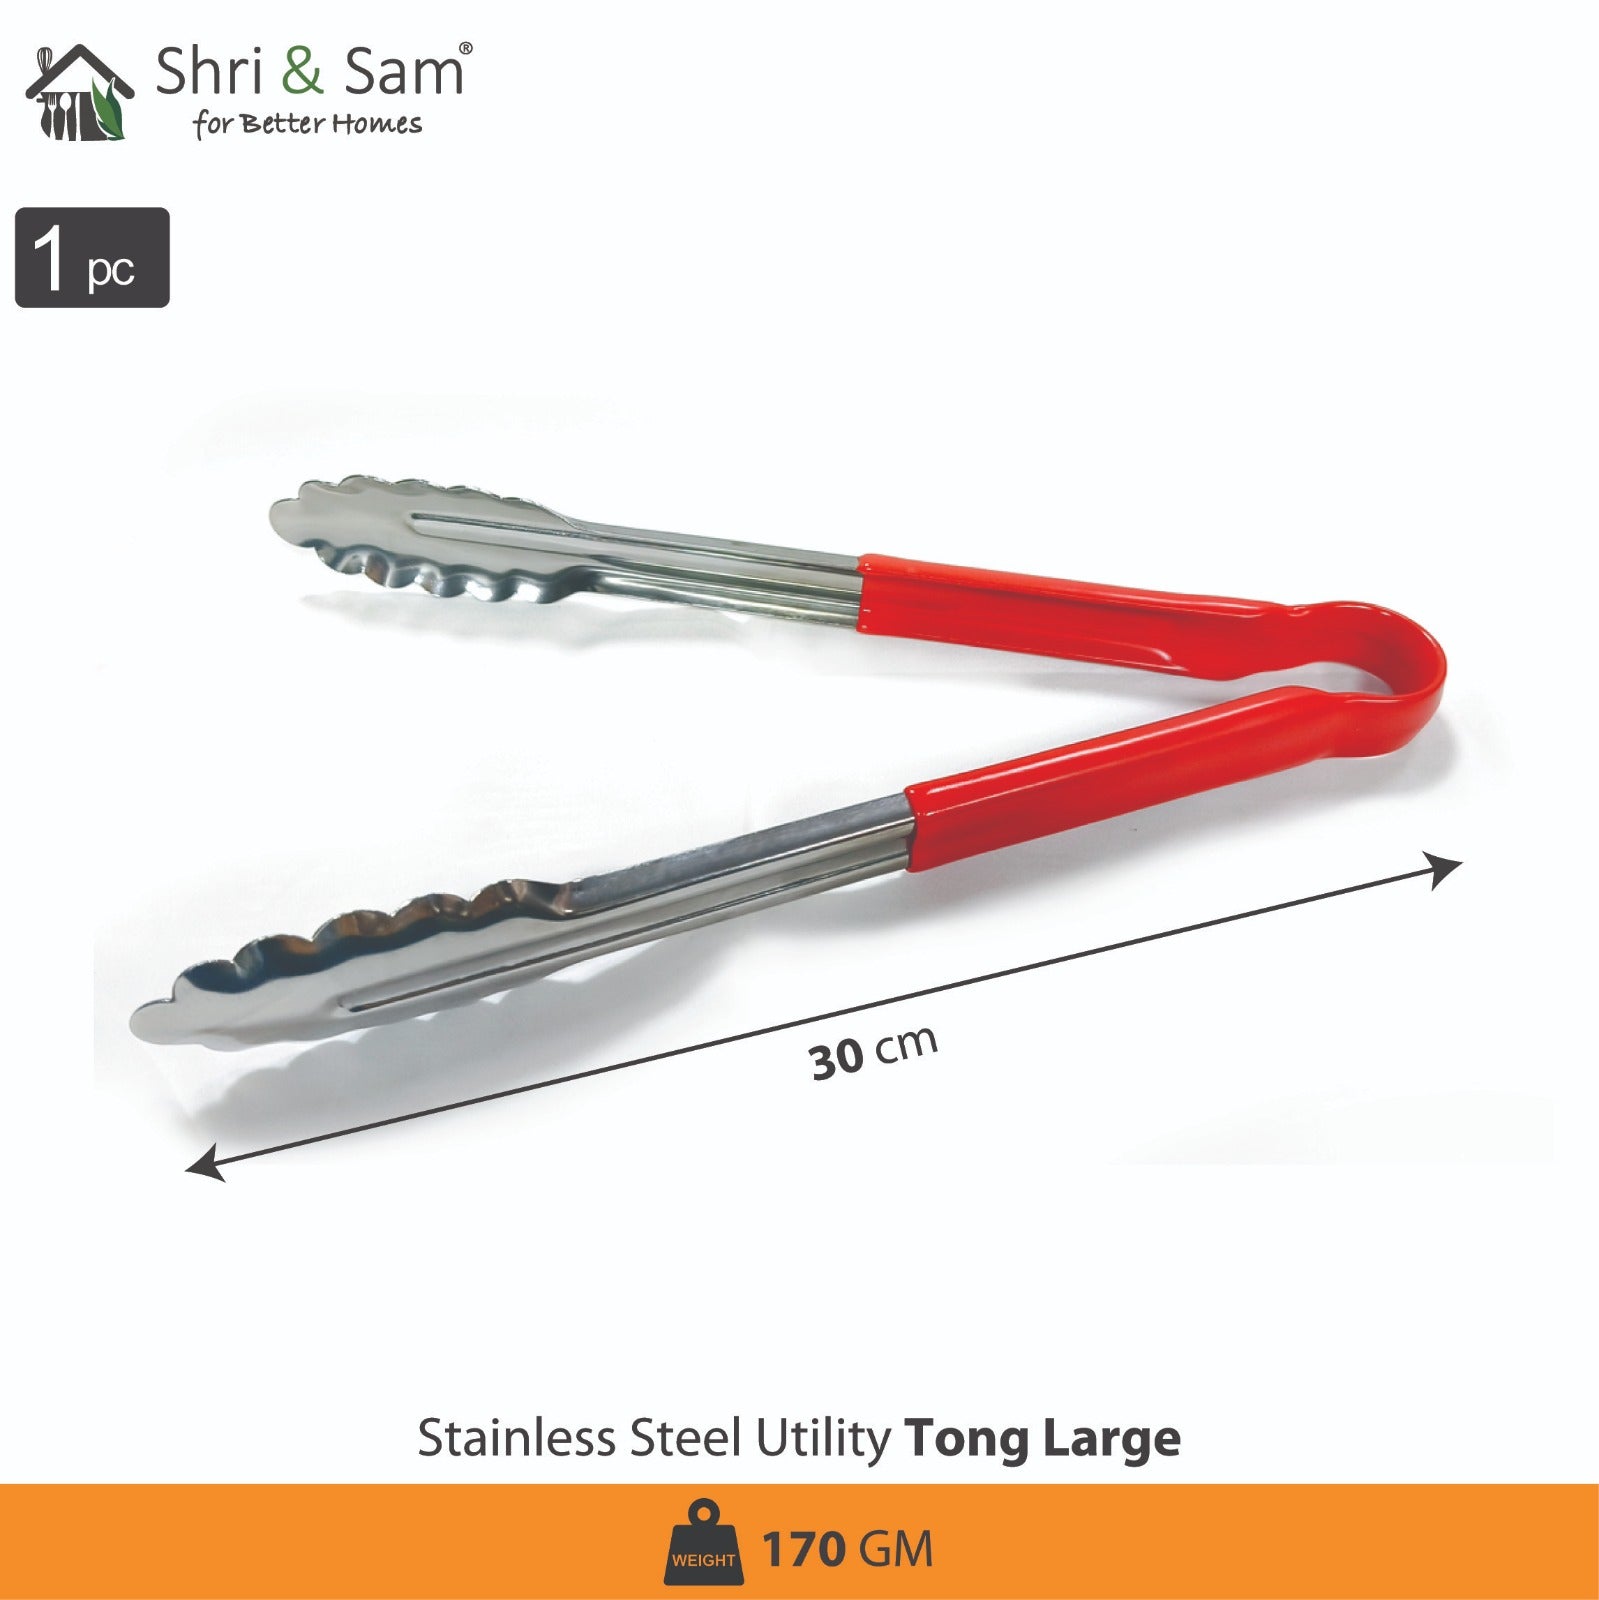 Stainless Steel Utility Tong Large